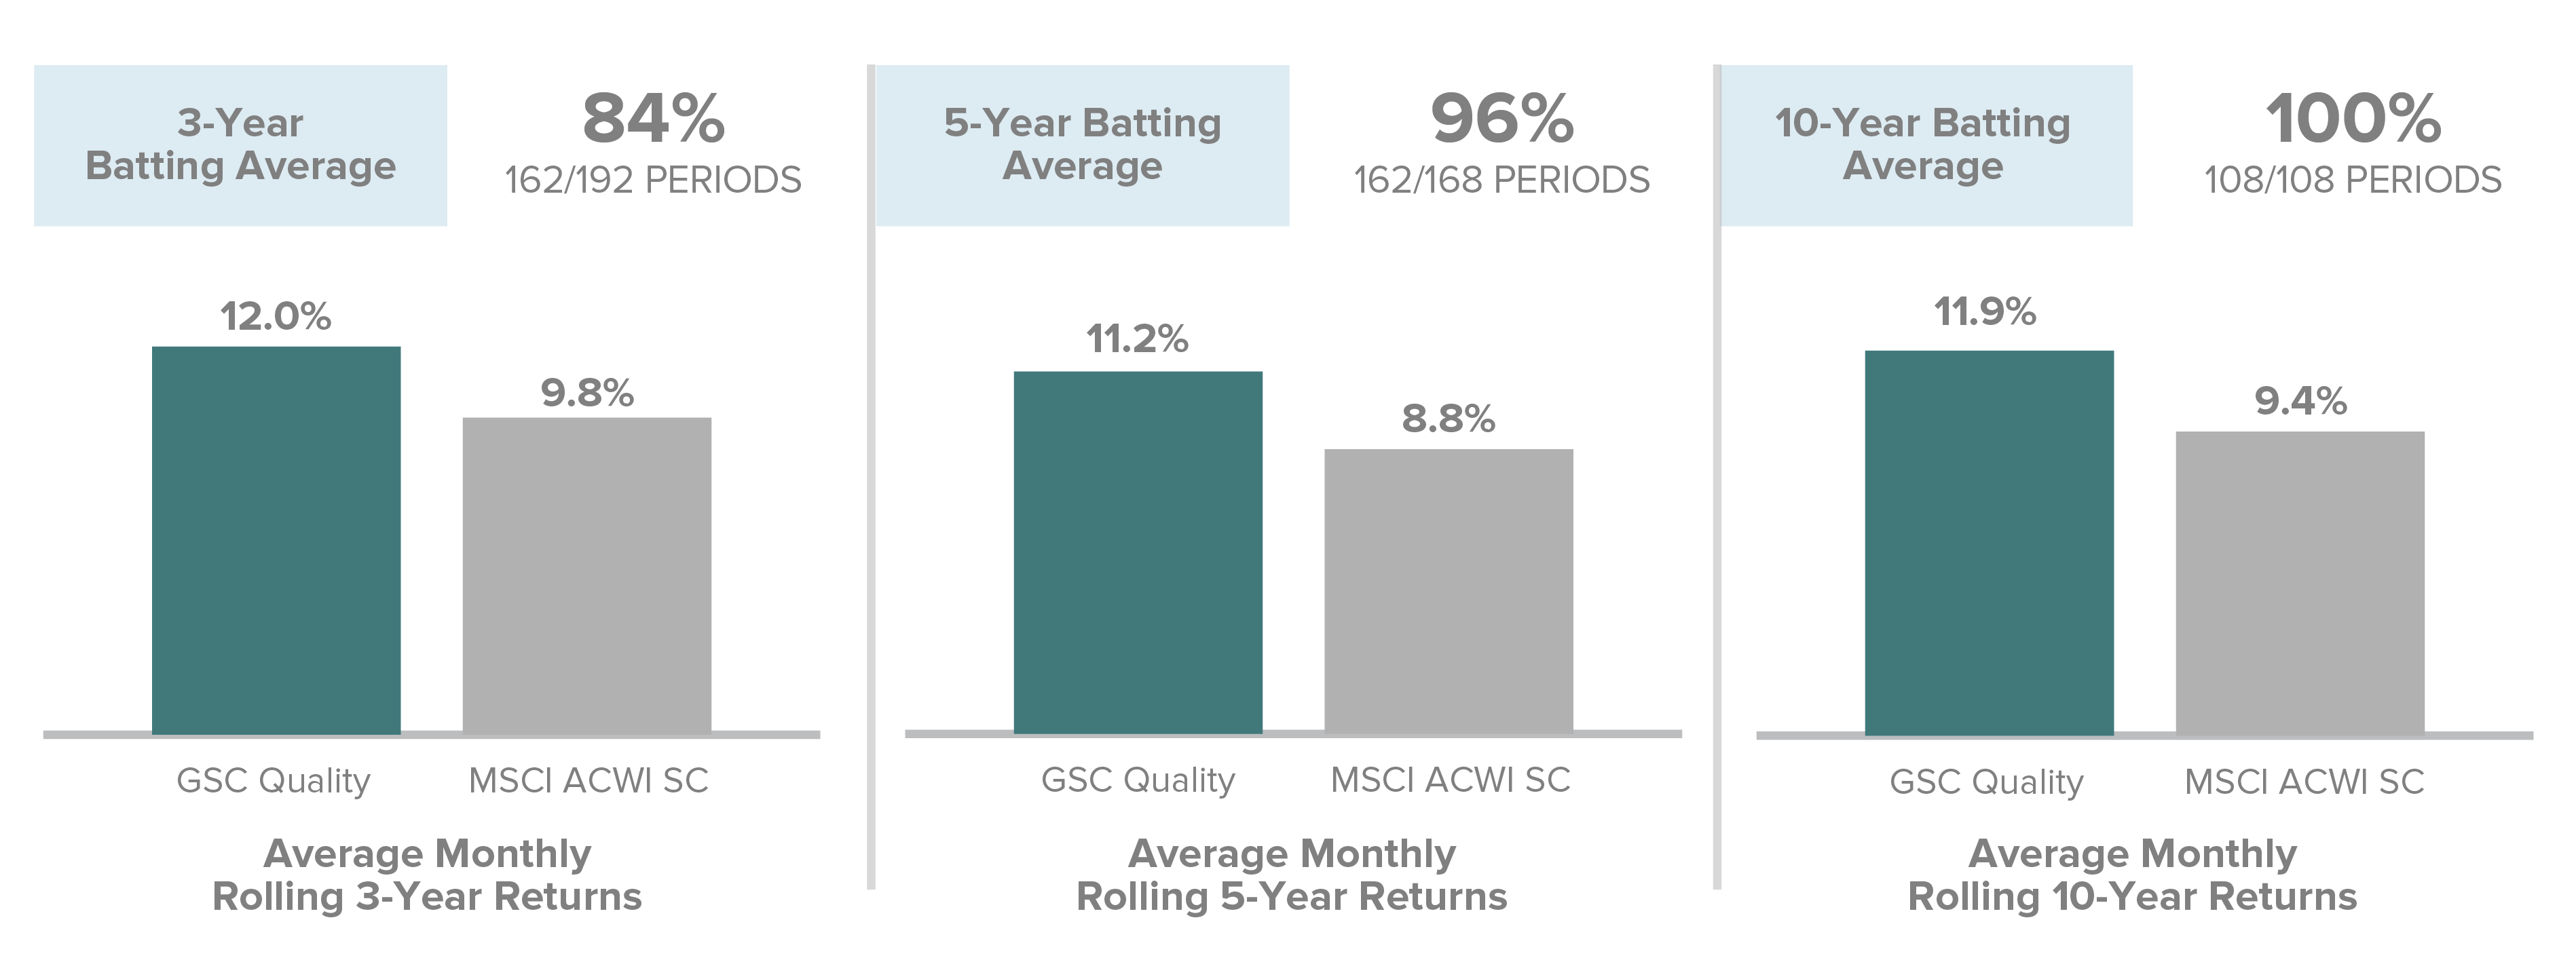 Batting averages: 3-year 84% in 162/192 periods; 5-year 96% in 162/168 periods; 10-year 100% in 108/108 periods